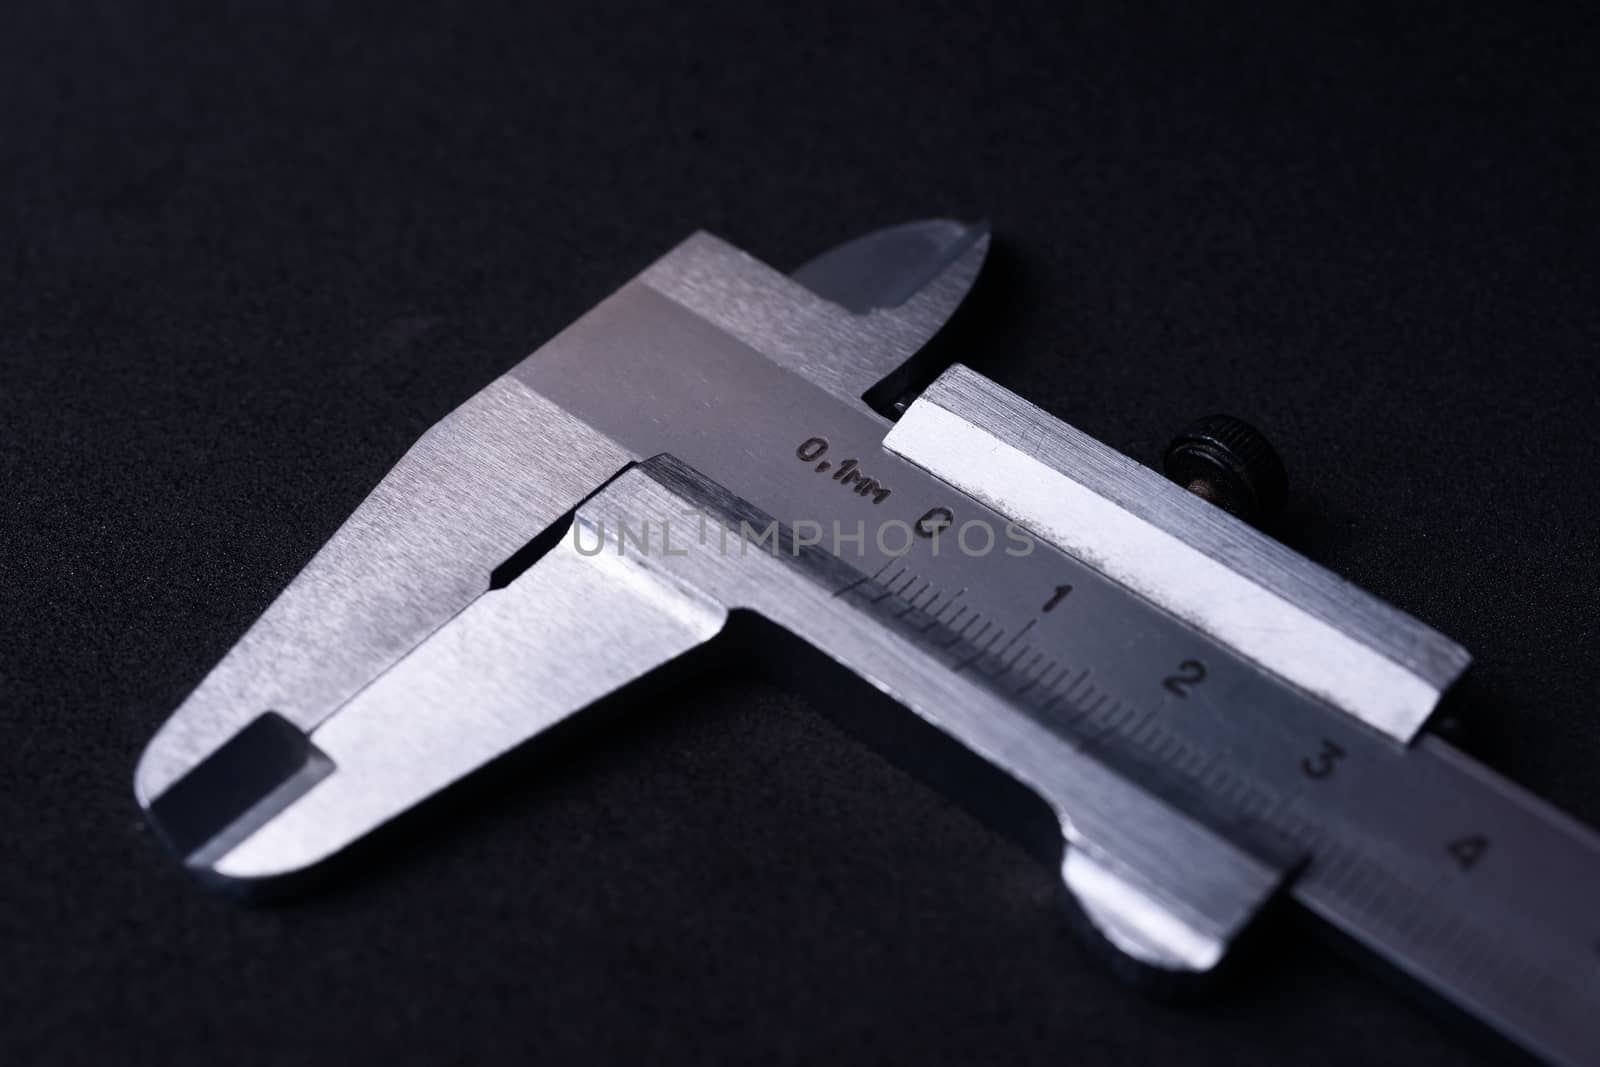 Vintage steel caliper tool closeup. Caliper in very good condition. Scale in metric units, milimeter step. Stock photo isolated on gray background.